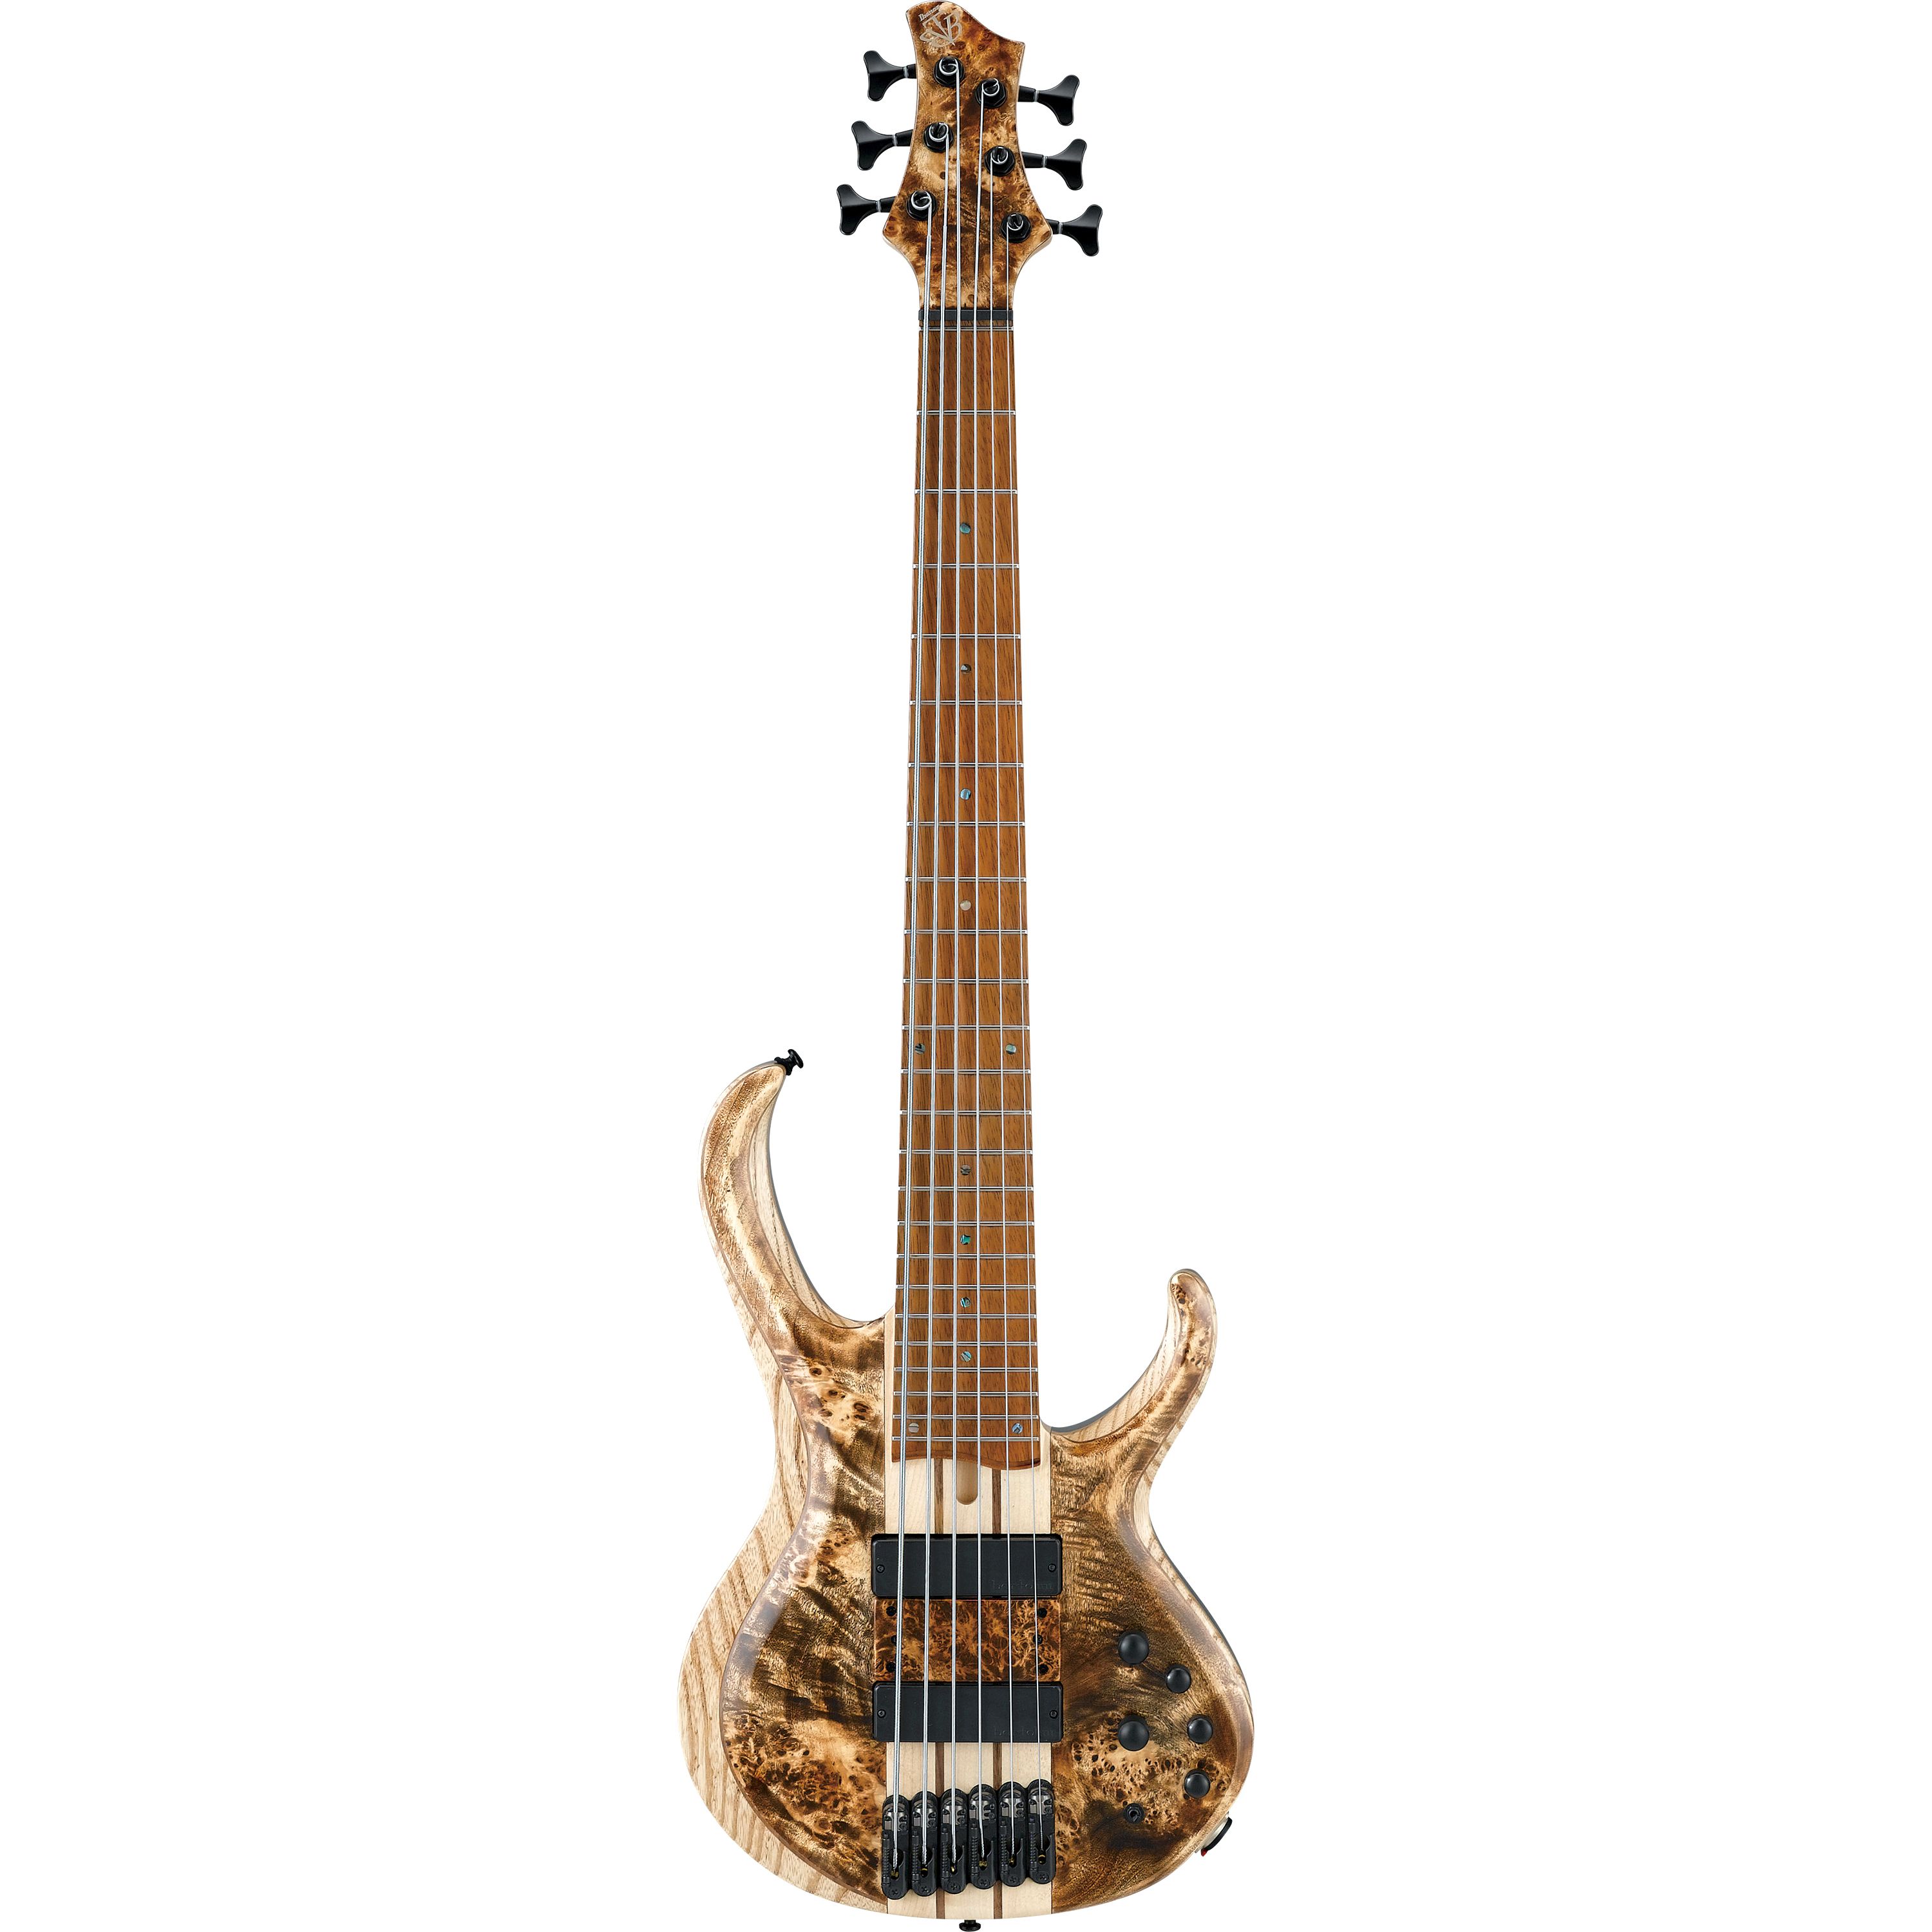 Ibanez BTB846V-ABL Bass Workshop Upgraded 33" "Volo" 6 String Antique Brown Stained Low Gloss B-Stock